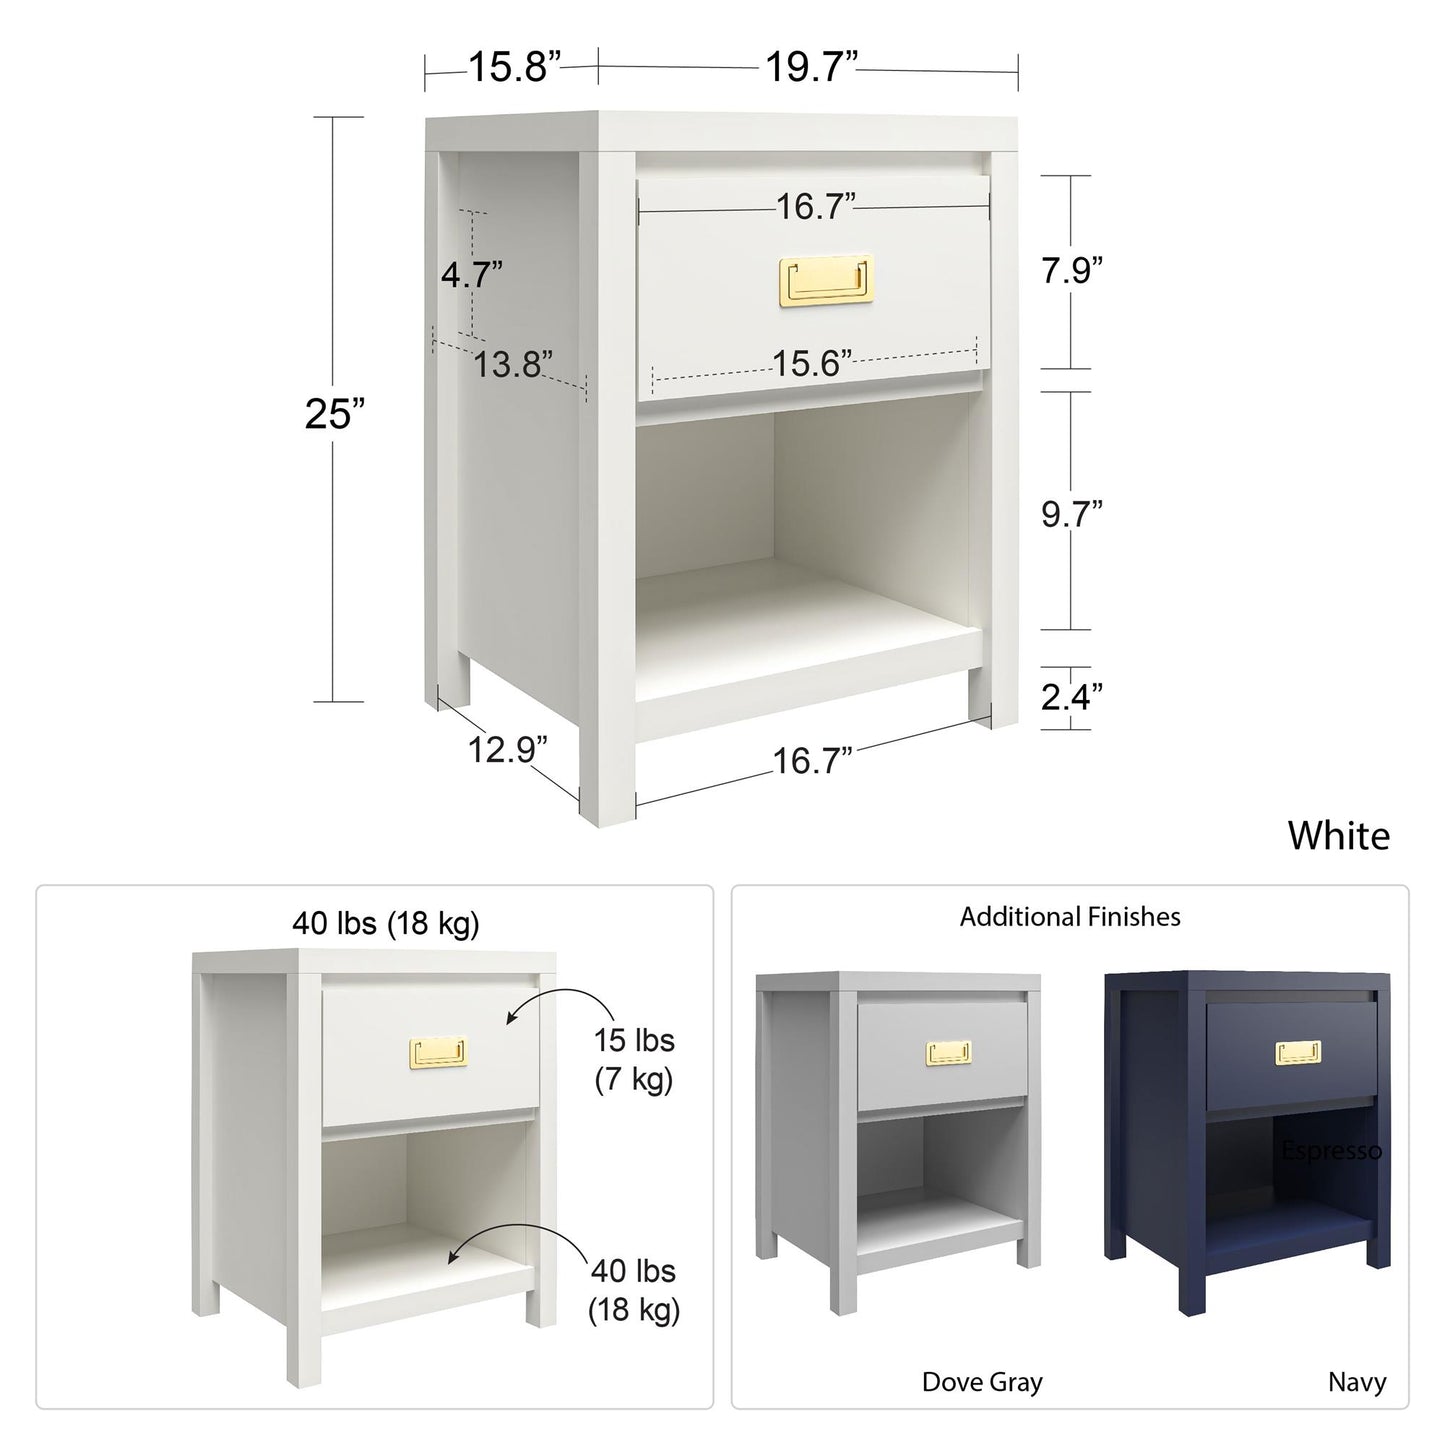 Monarch Hill Haven Kids’ 1 Drawer Nightstand with Gold Drawer Pull - White